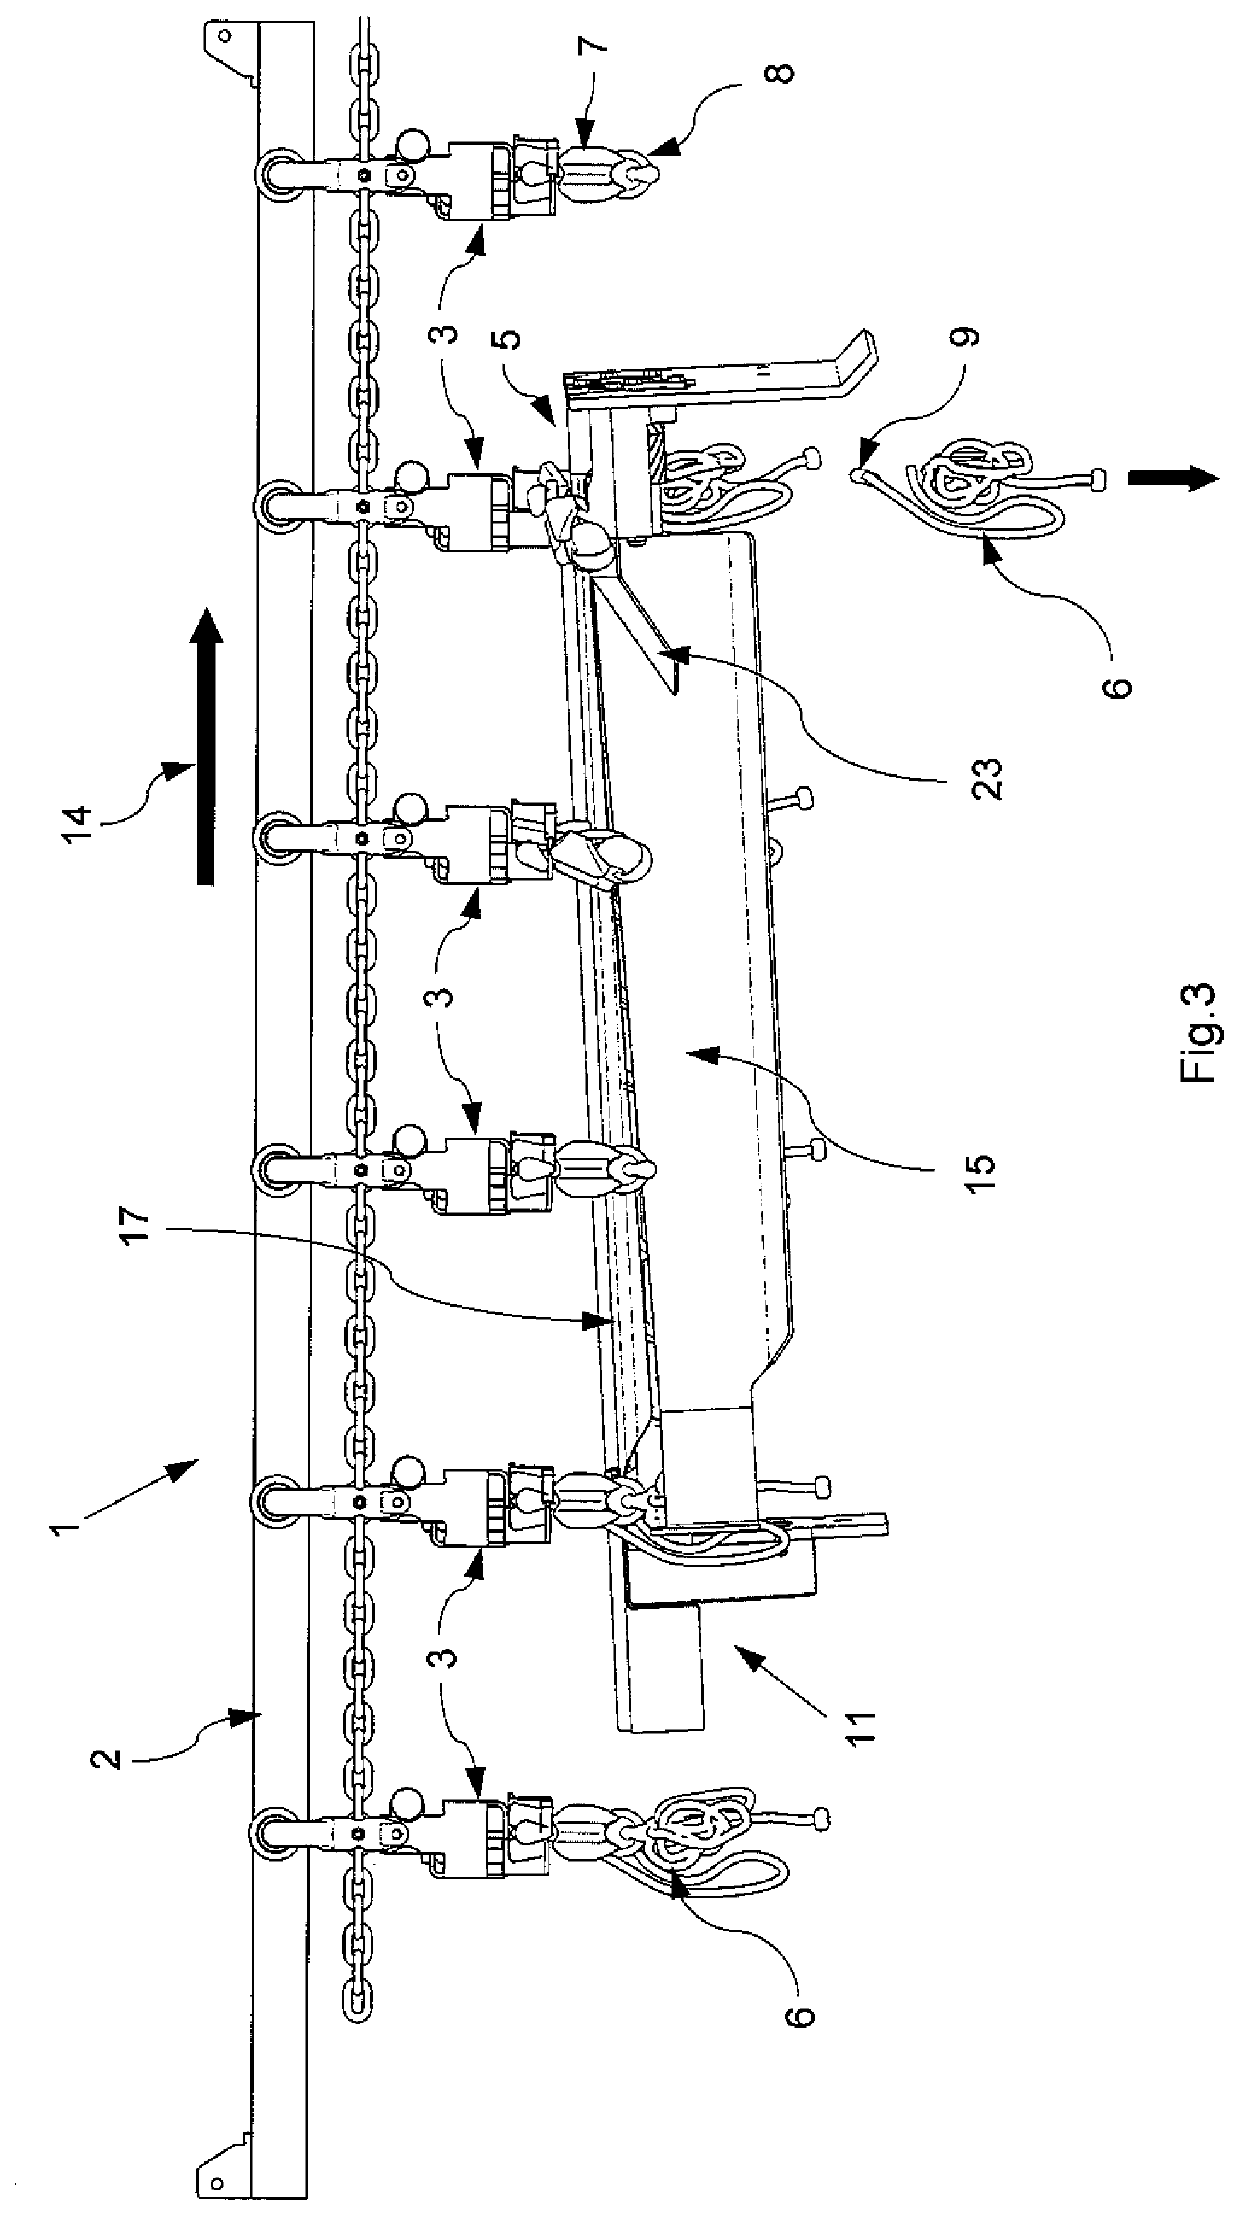 Intestines processing system and method for processing an intestines package